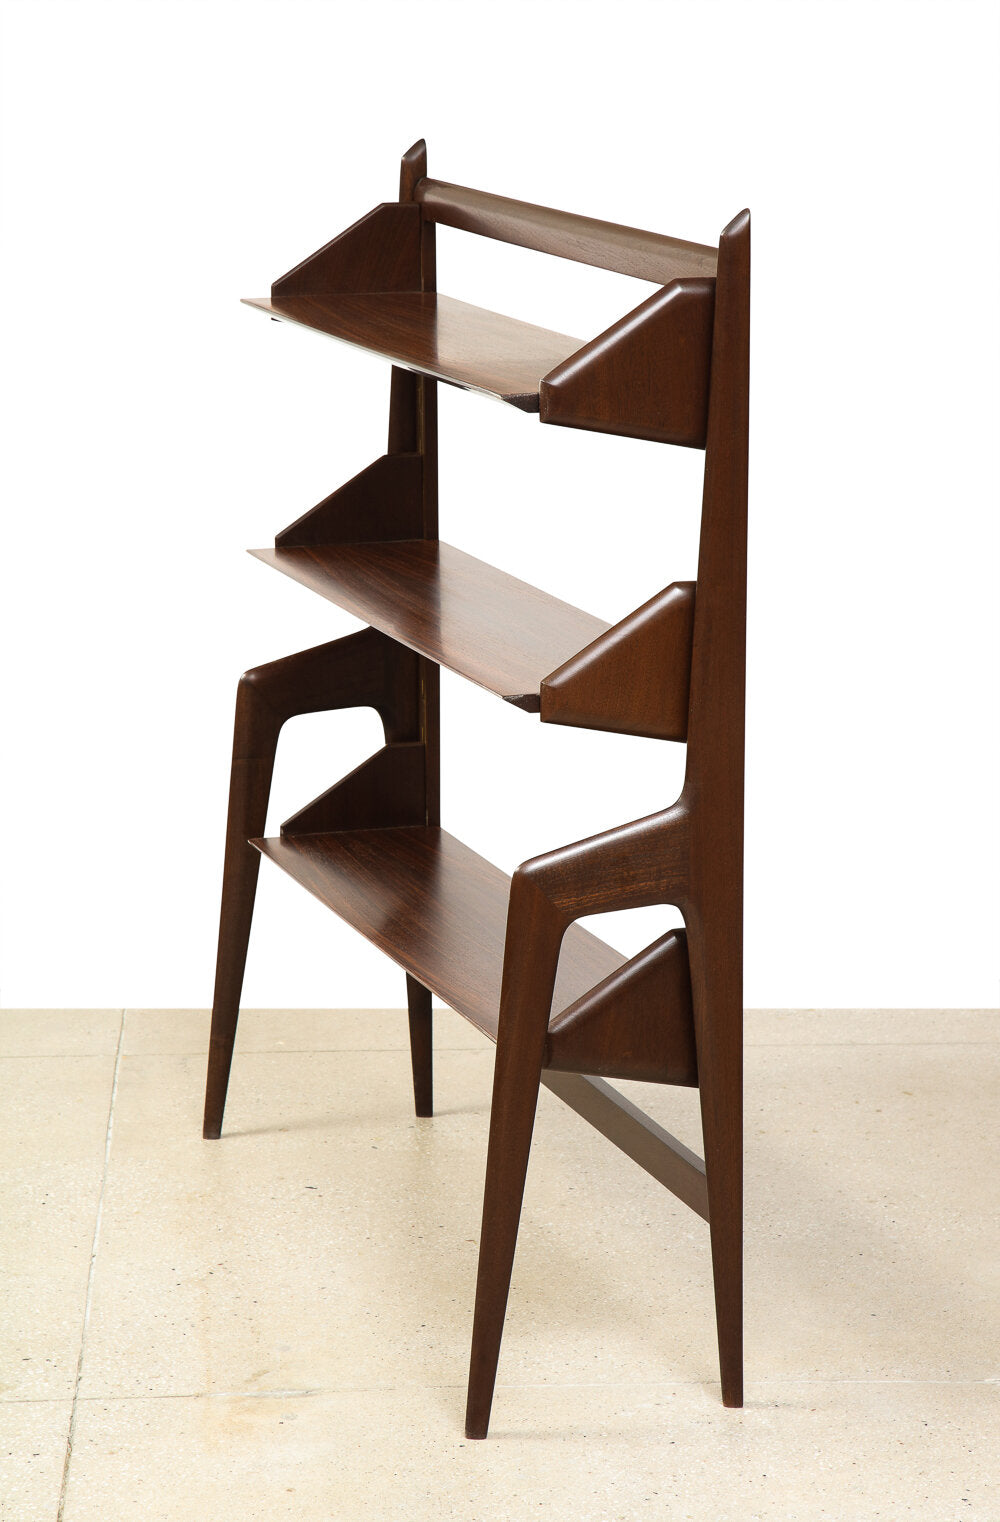 Sculptural Bookcase in the manner of Ico Parisi